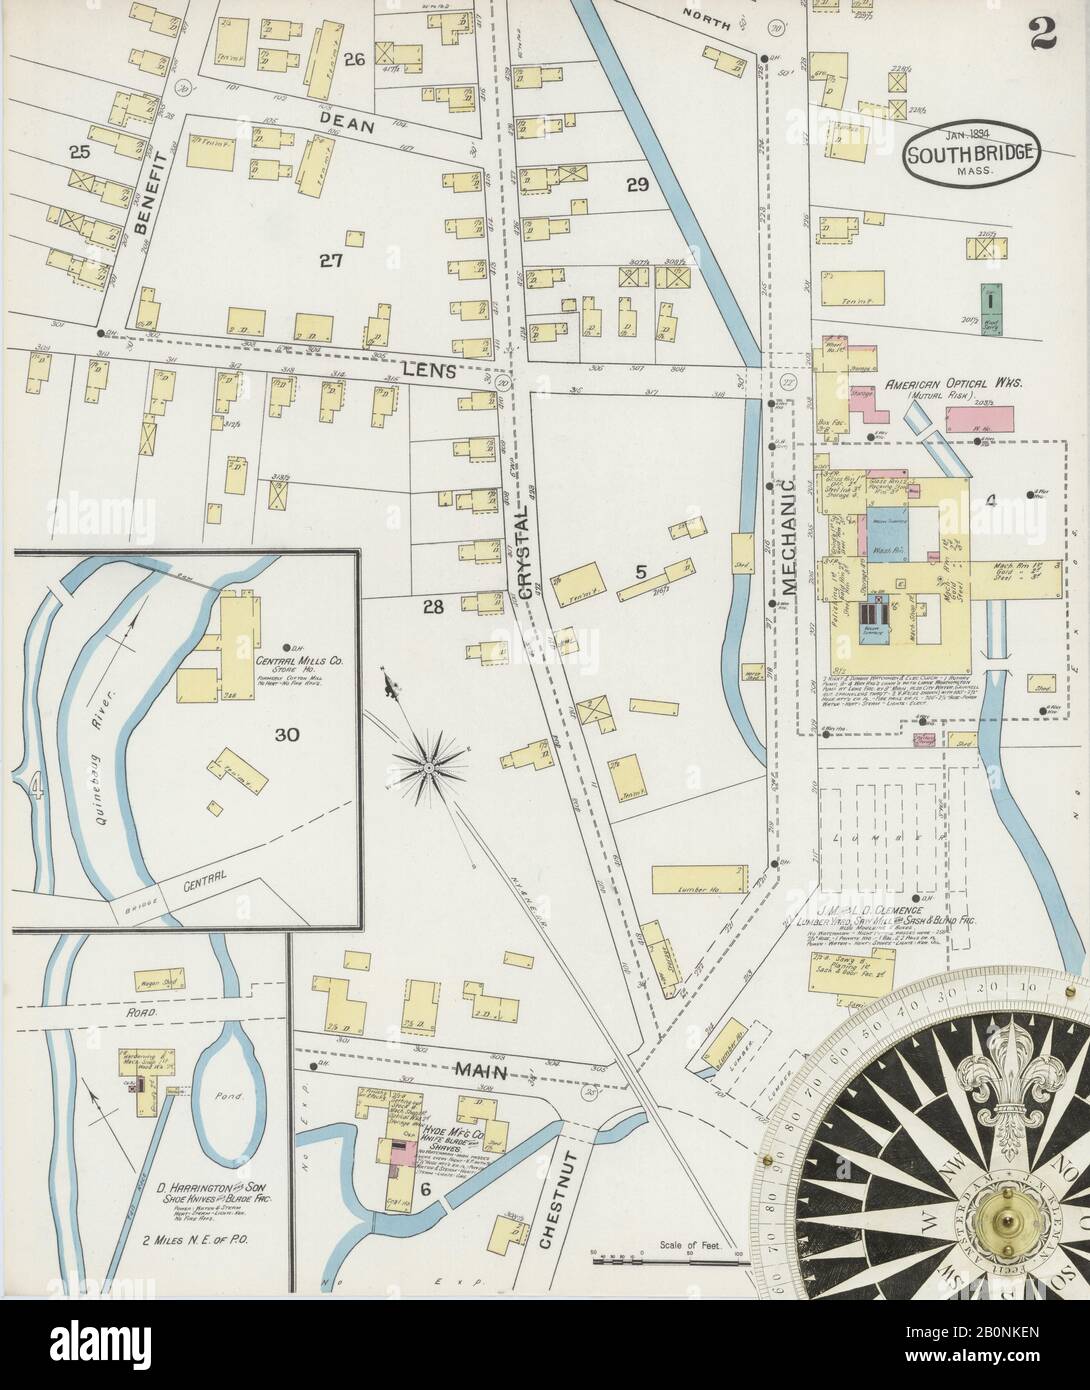 Image 2 of Sanborn Fire Insurance Map from Southbridge, Worcester County, Massachusetts. Jan 1894. 10 Sheet(s). Includes Globe Village, Sturbridge, Fiskdale, America, street map with a Nineteenth Century compass Stock Photo